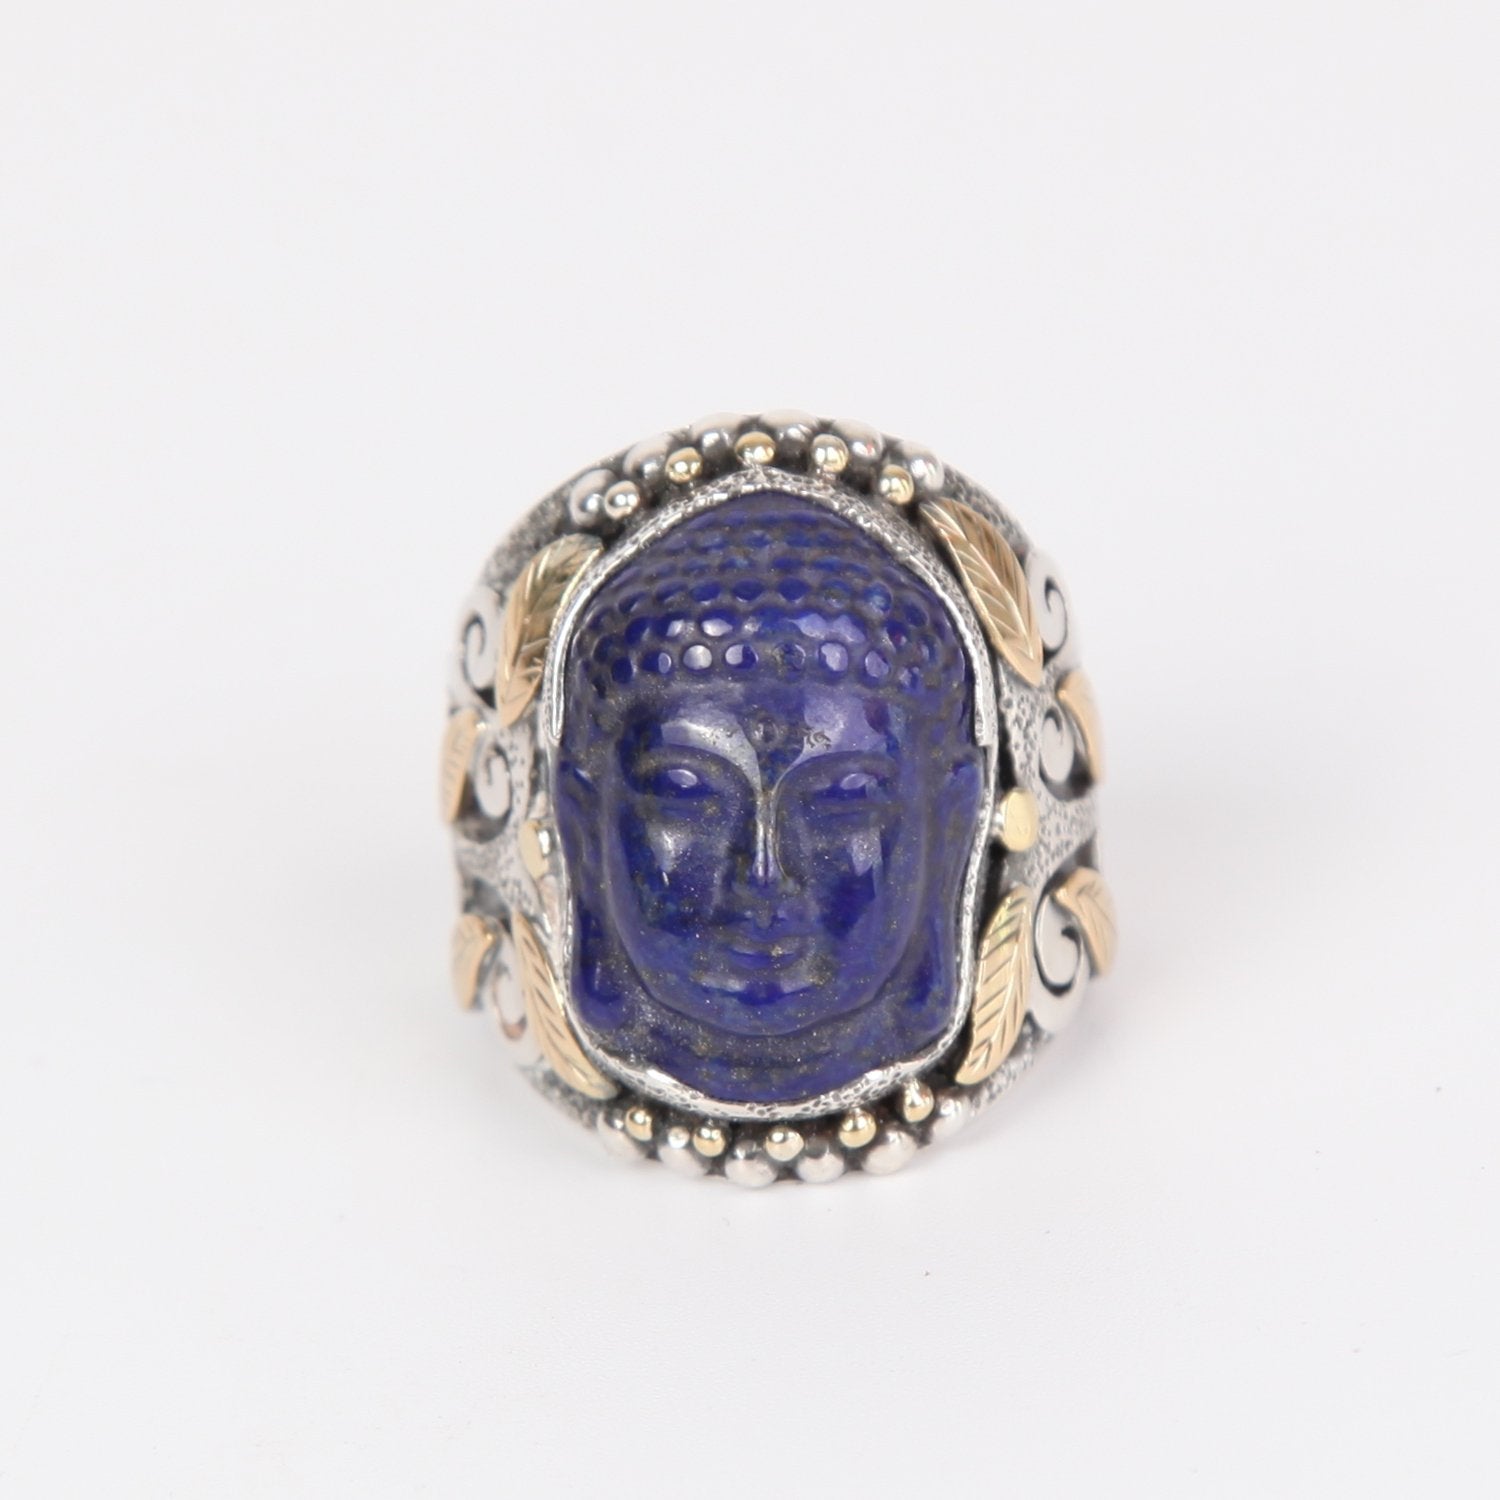 Lapis Lazuli Buddha Head Ring with Sterling Silver and 18k Gold